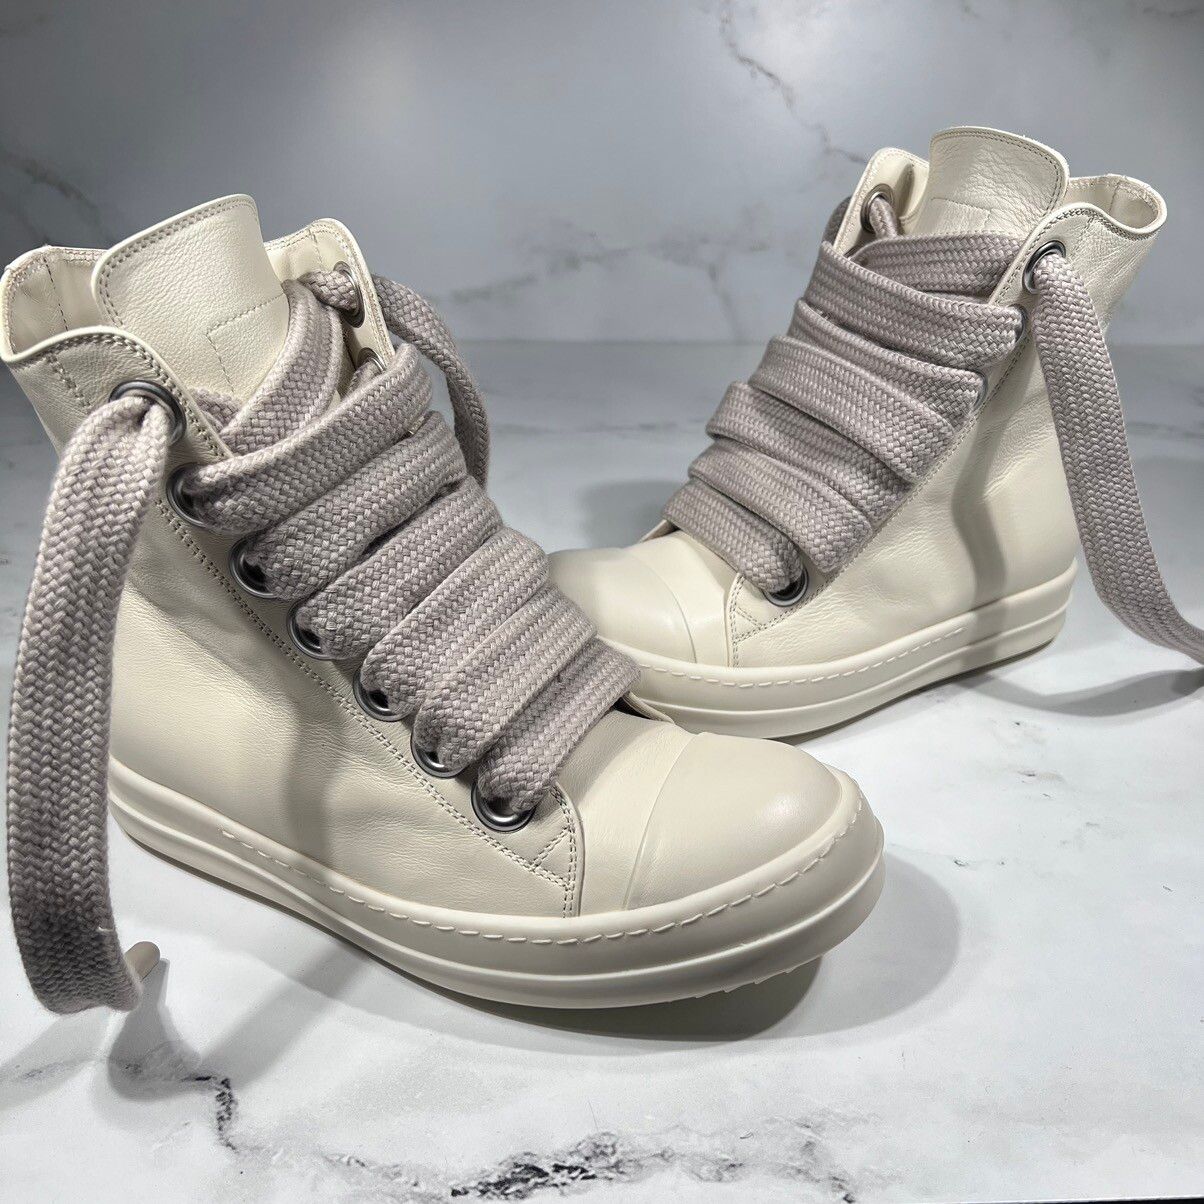 Rick Owens Rick Owens Ramones Milk Leather Thick Lace High Top Sneakers Size US 7 / IT 37 - 3 Thumbnail